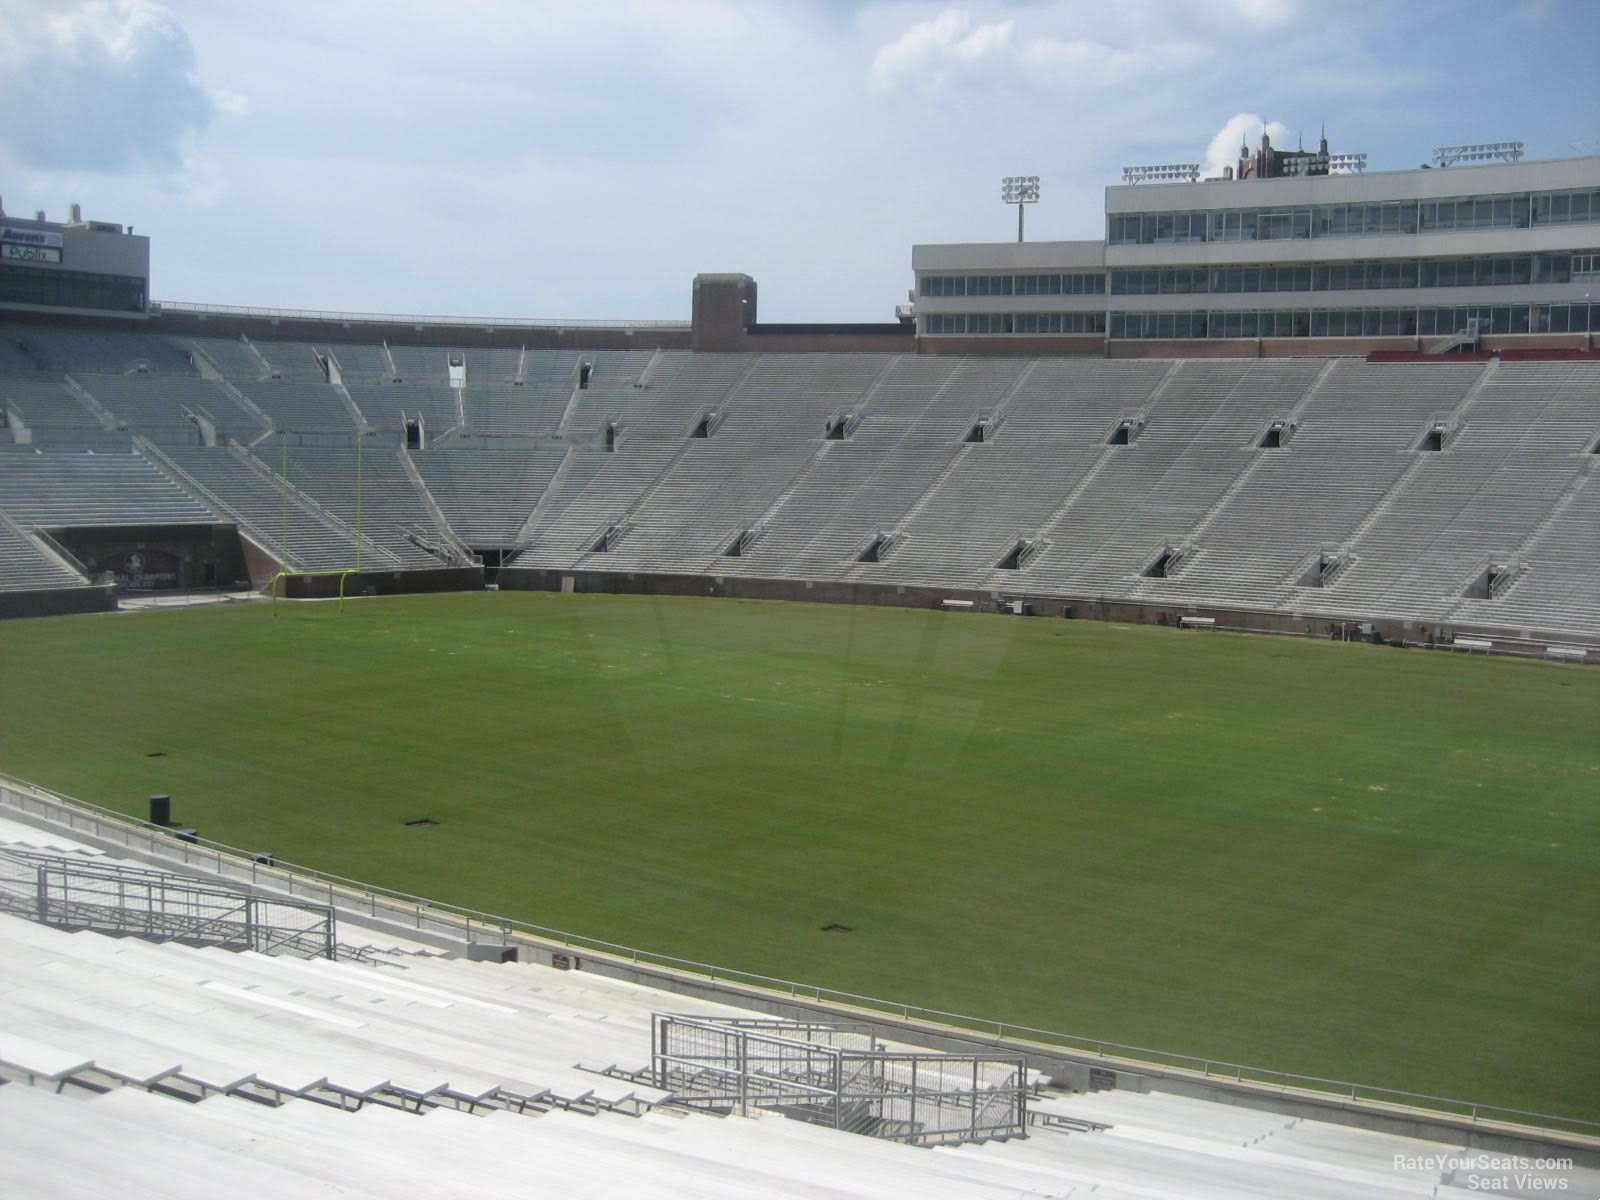 section 7, row 41 seat view  - doak campbell stadium